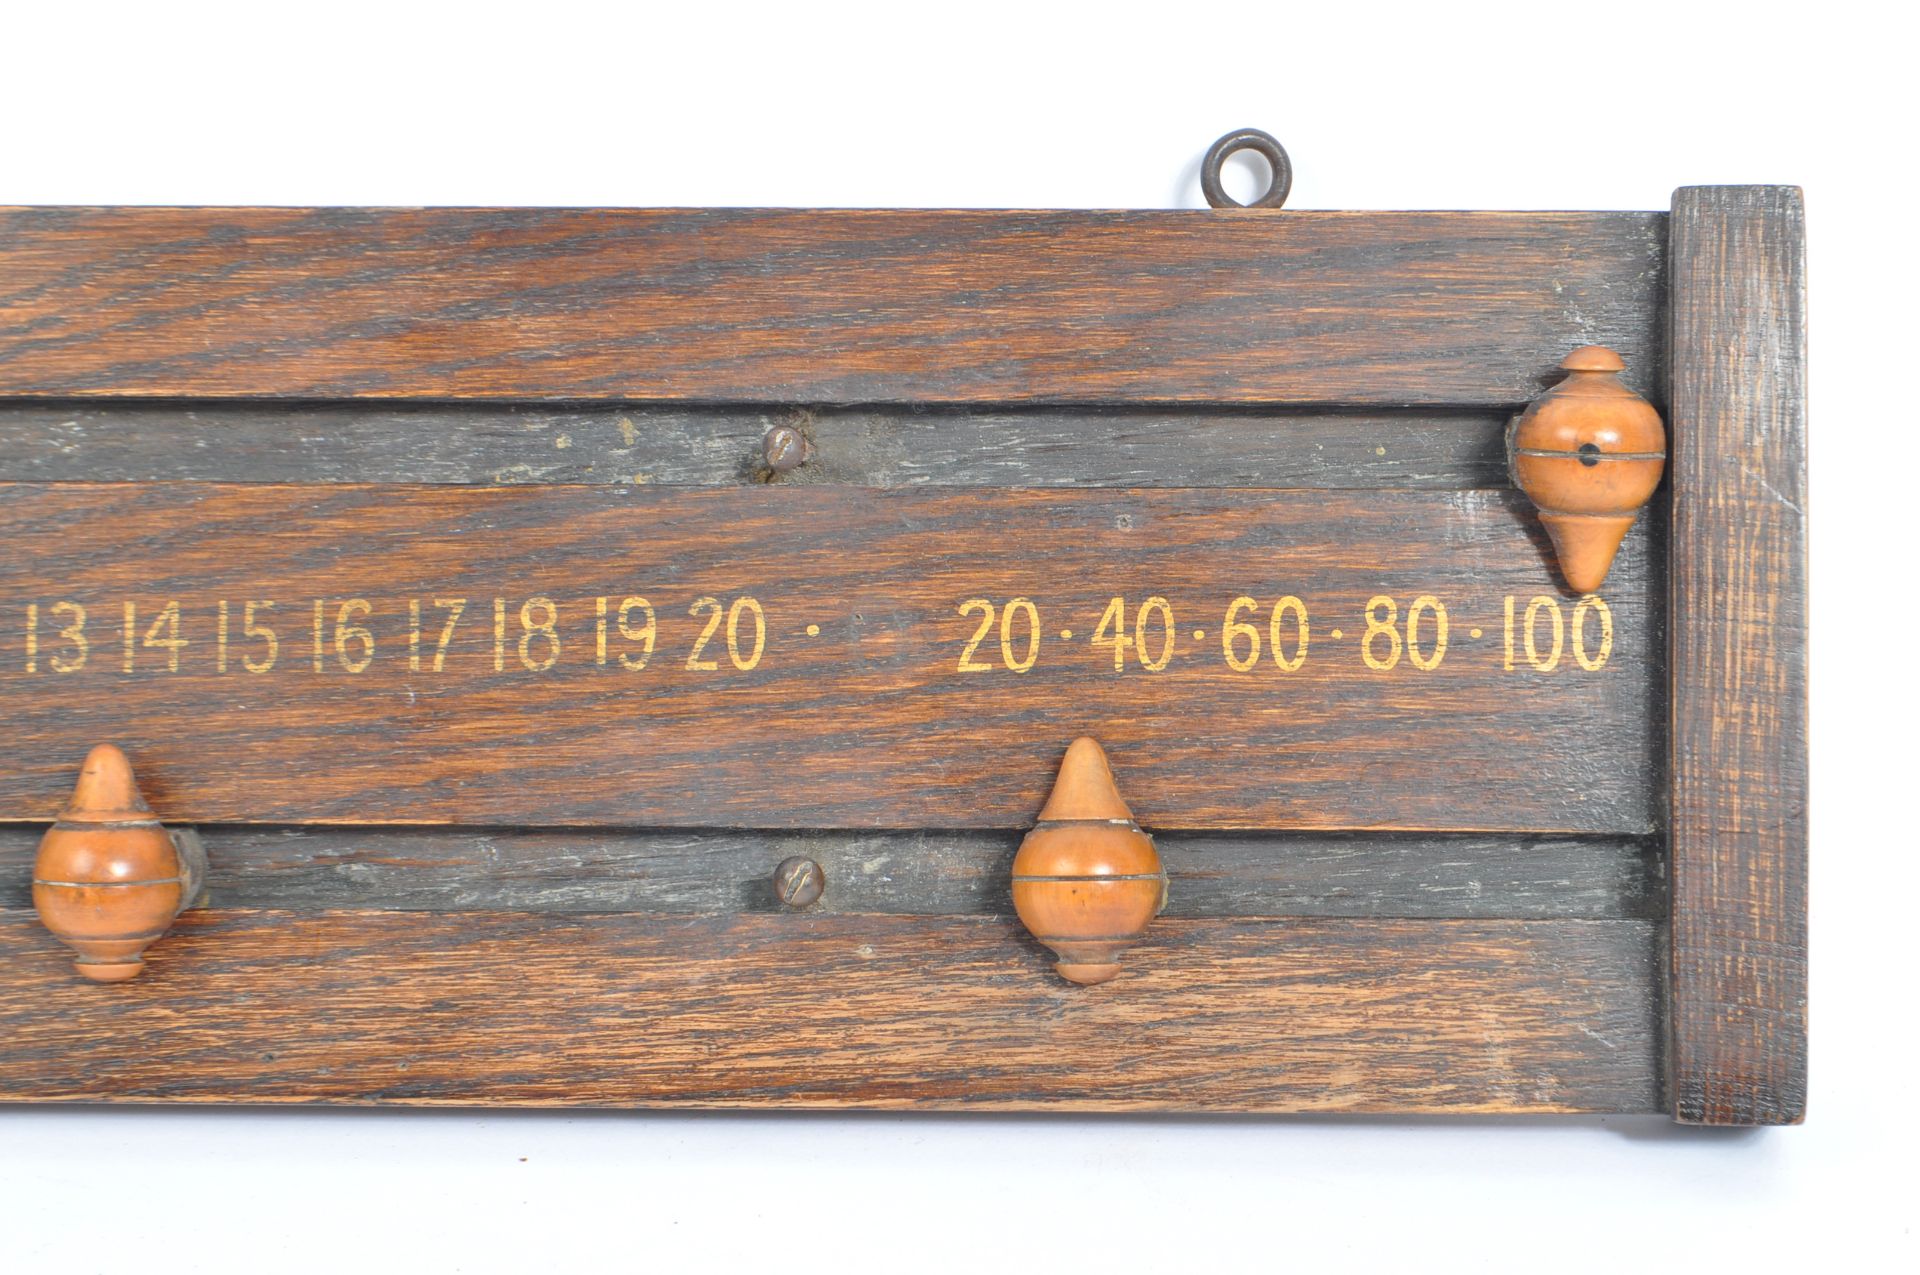 ANTIQUE WALL MOUNTED BILLIARDS SNOOKER SCORE BOARD - Image 3 of 5